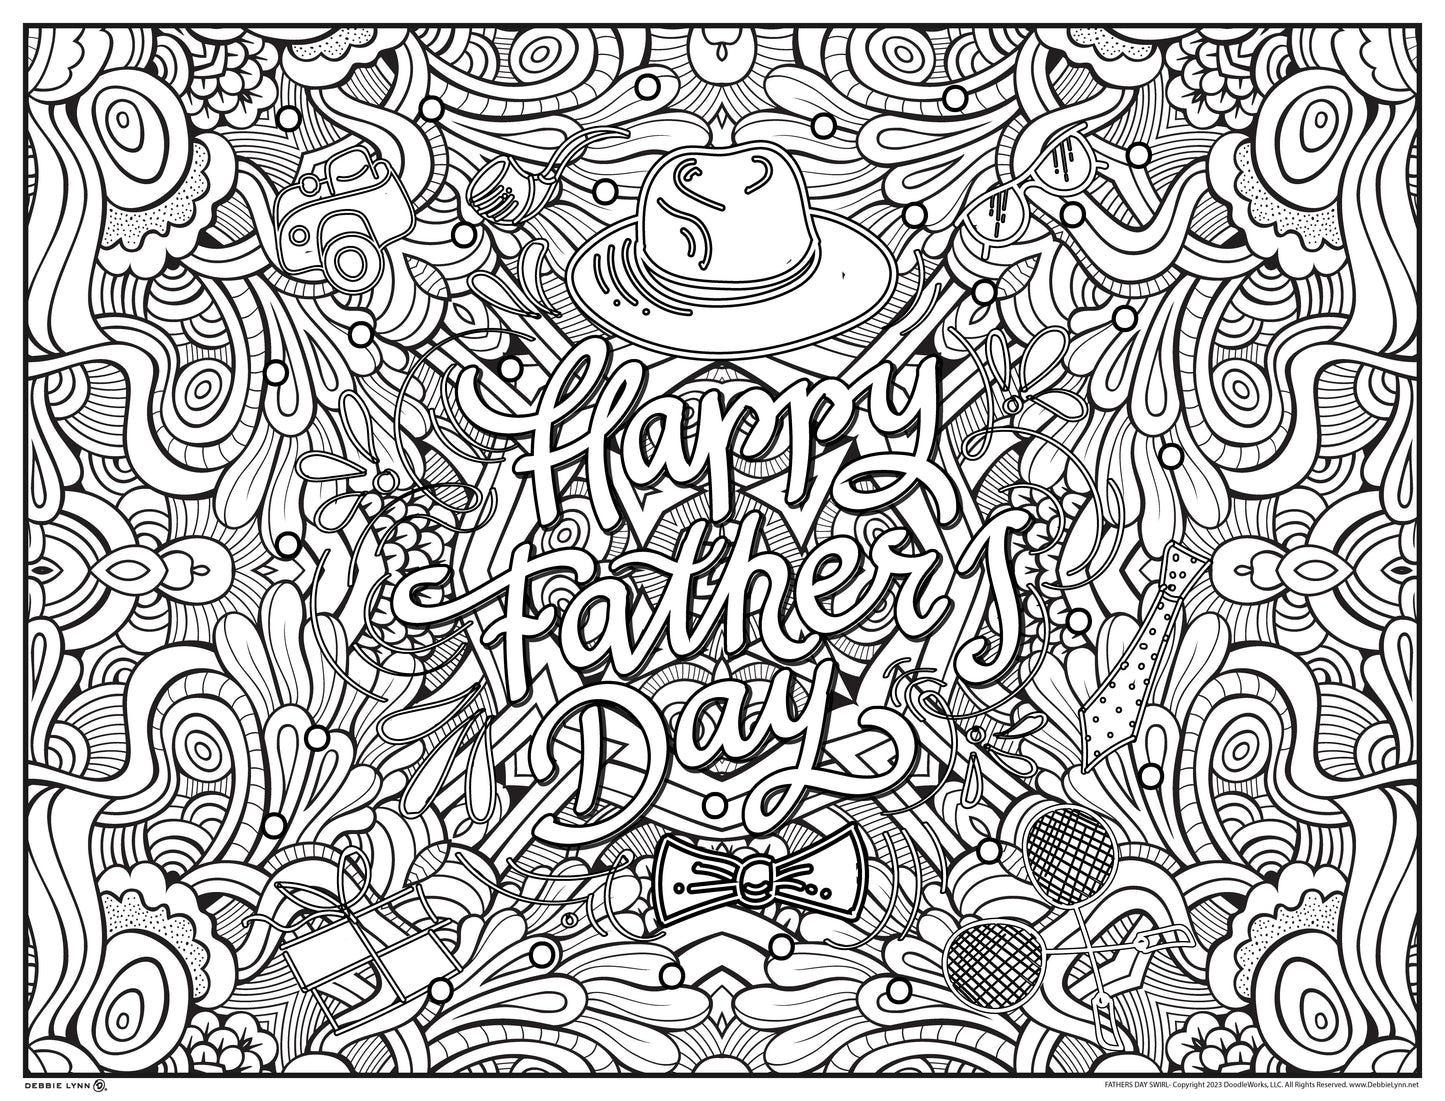 Fathers Day Swirl Personalized Giant Coloring Poster 46"x60"